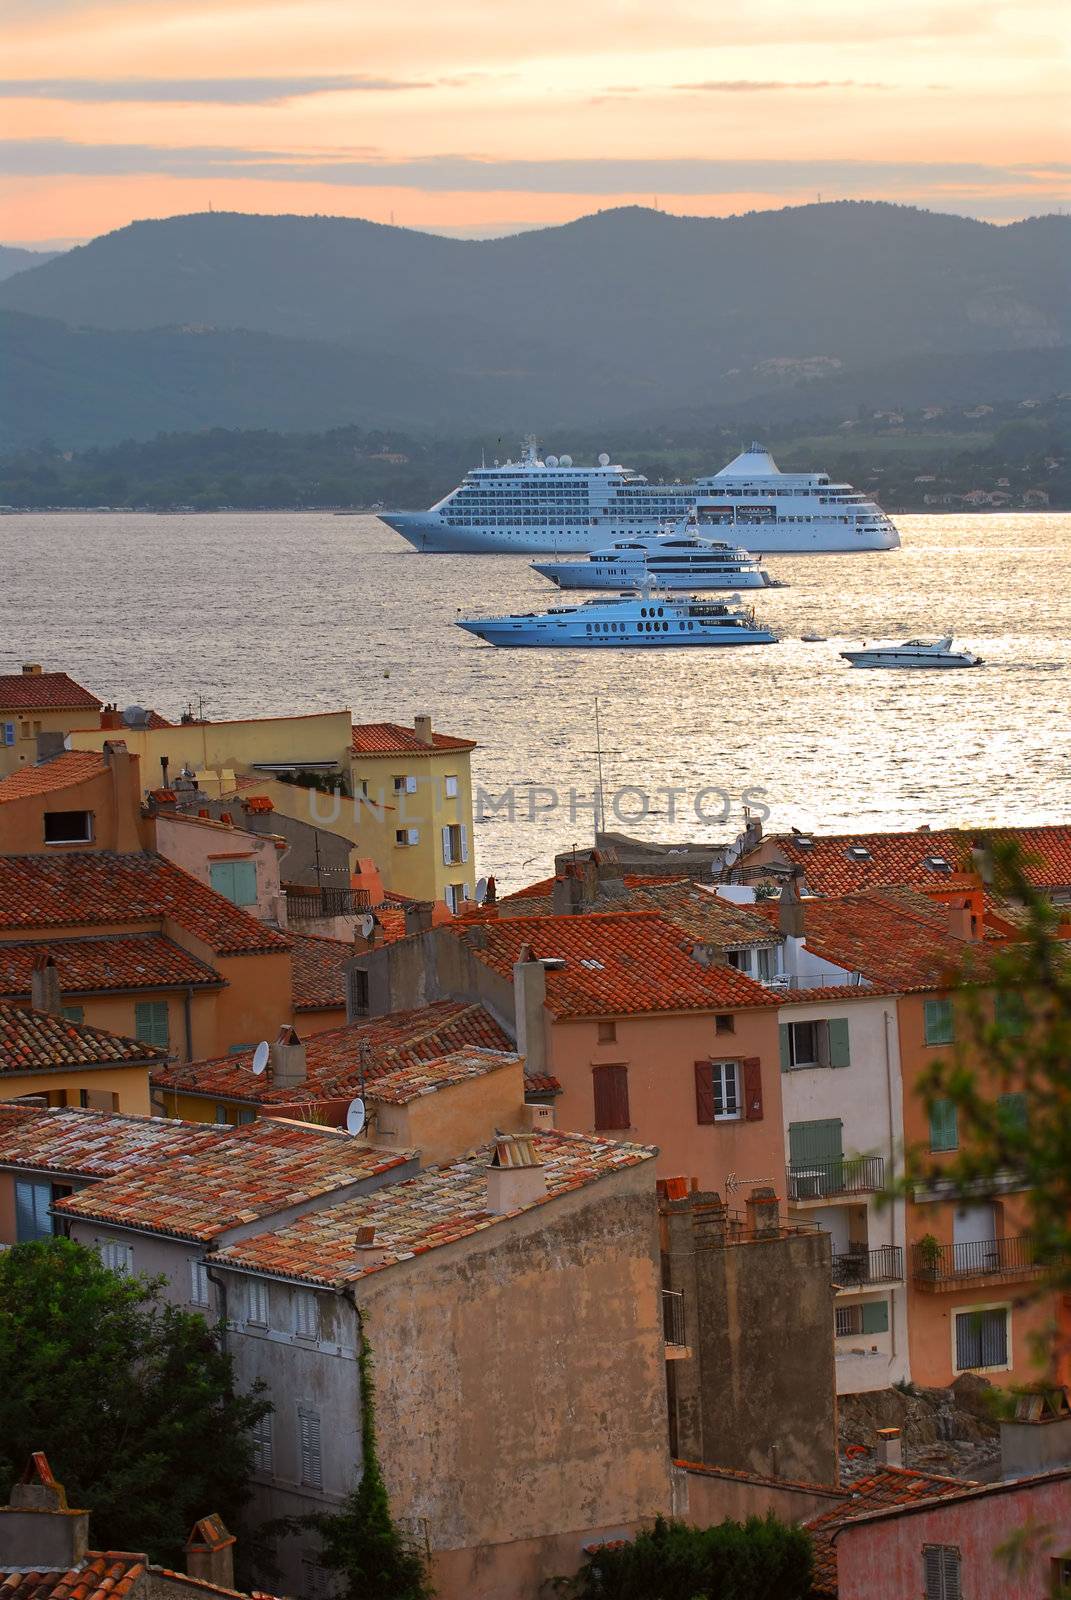 Cruise ships at St.Tropez at sunset in French Riviera